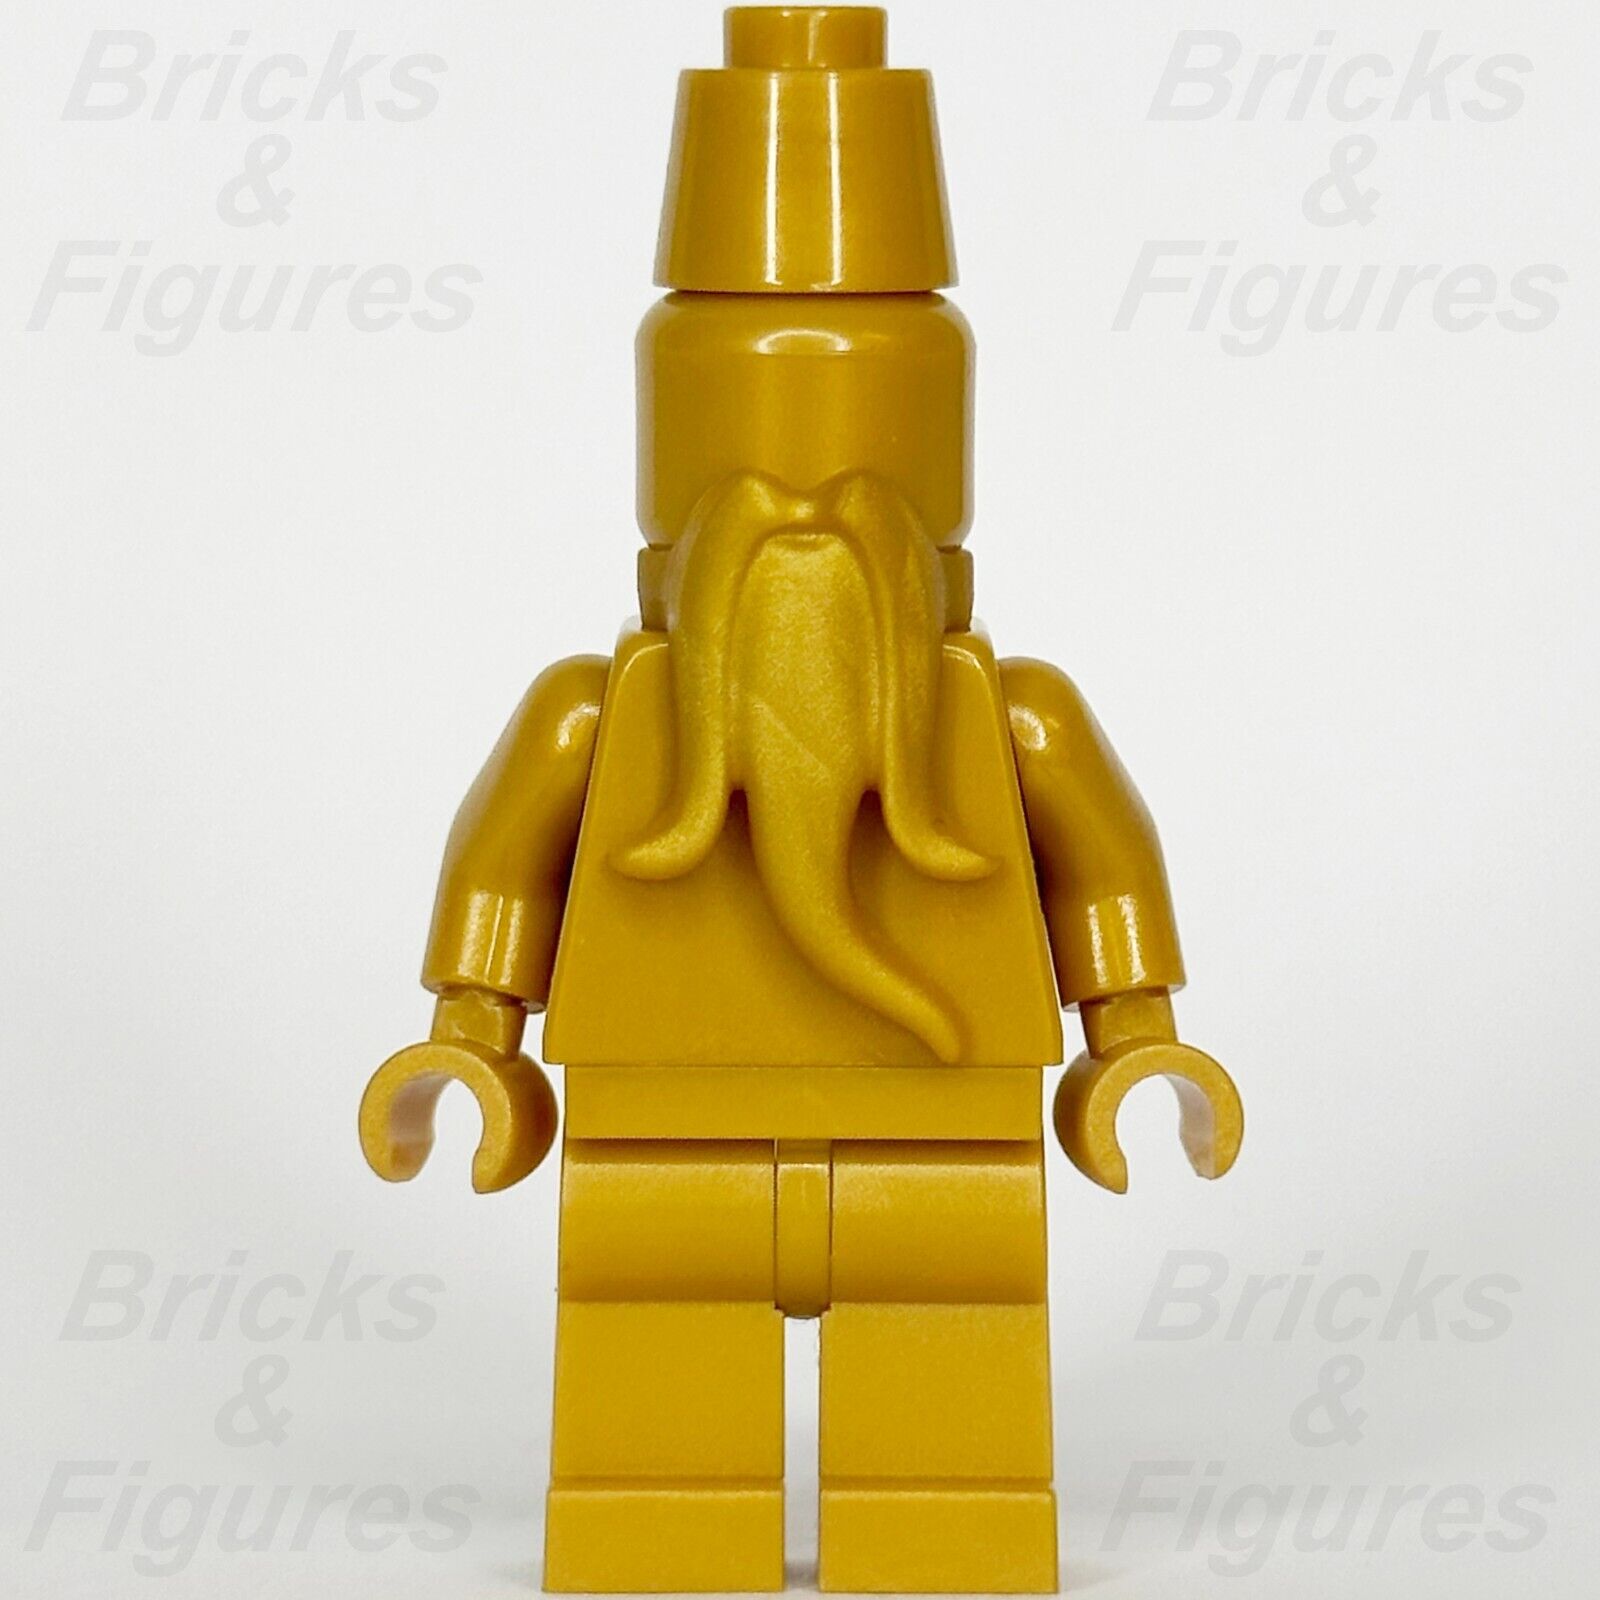 LEGO Harry Potter The Ministry of Magic Statue Minifigure Gold 76403 hp363